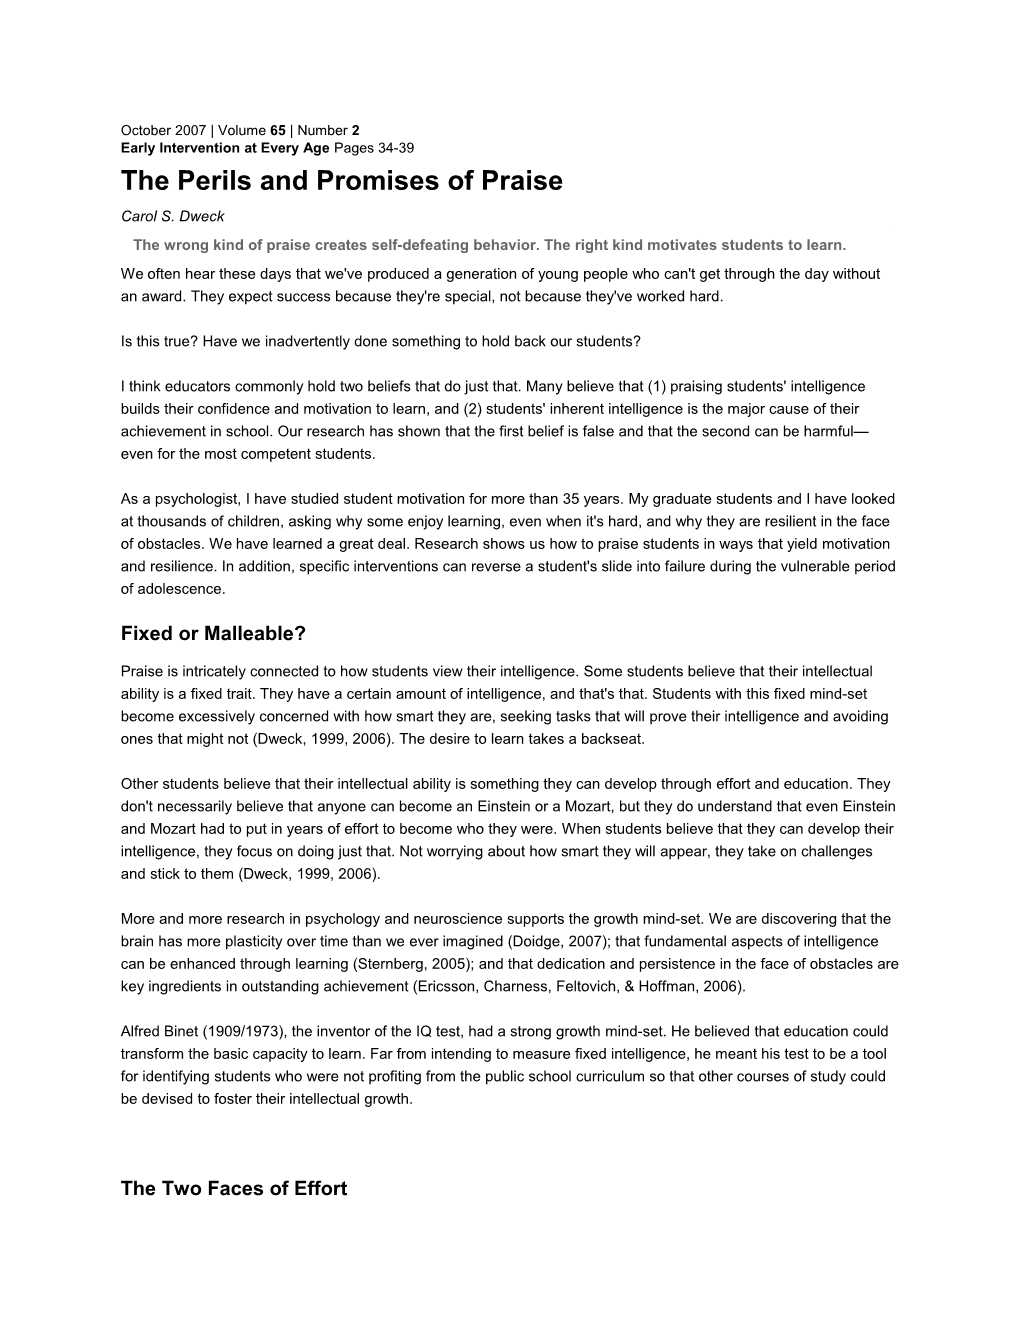 The Perils and Promises of Praise